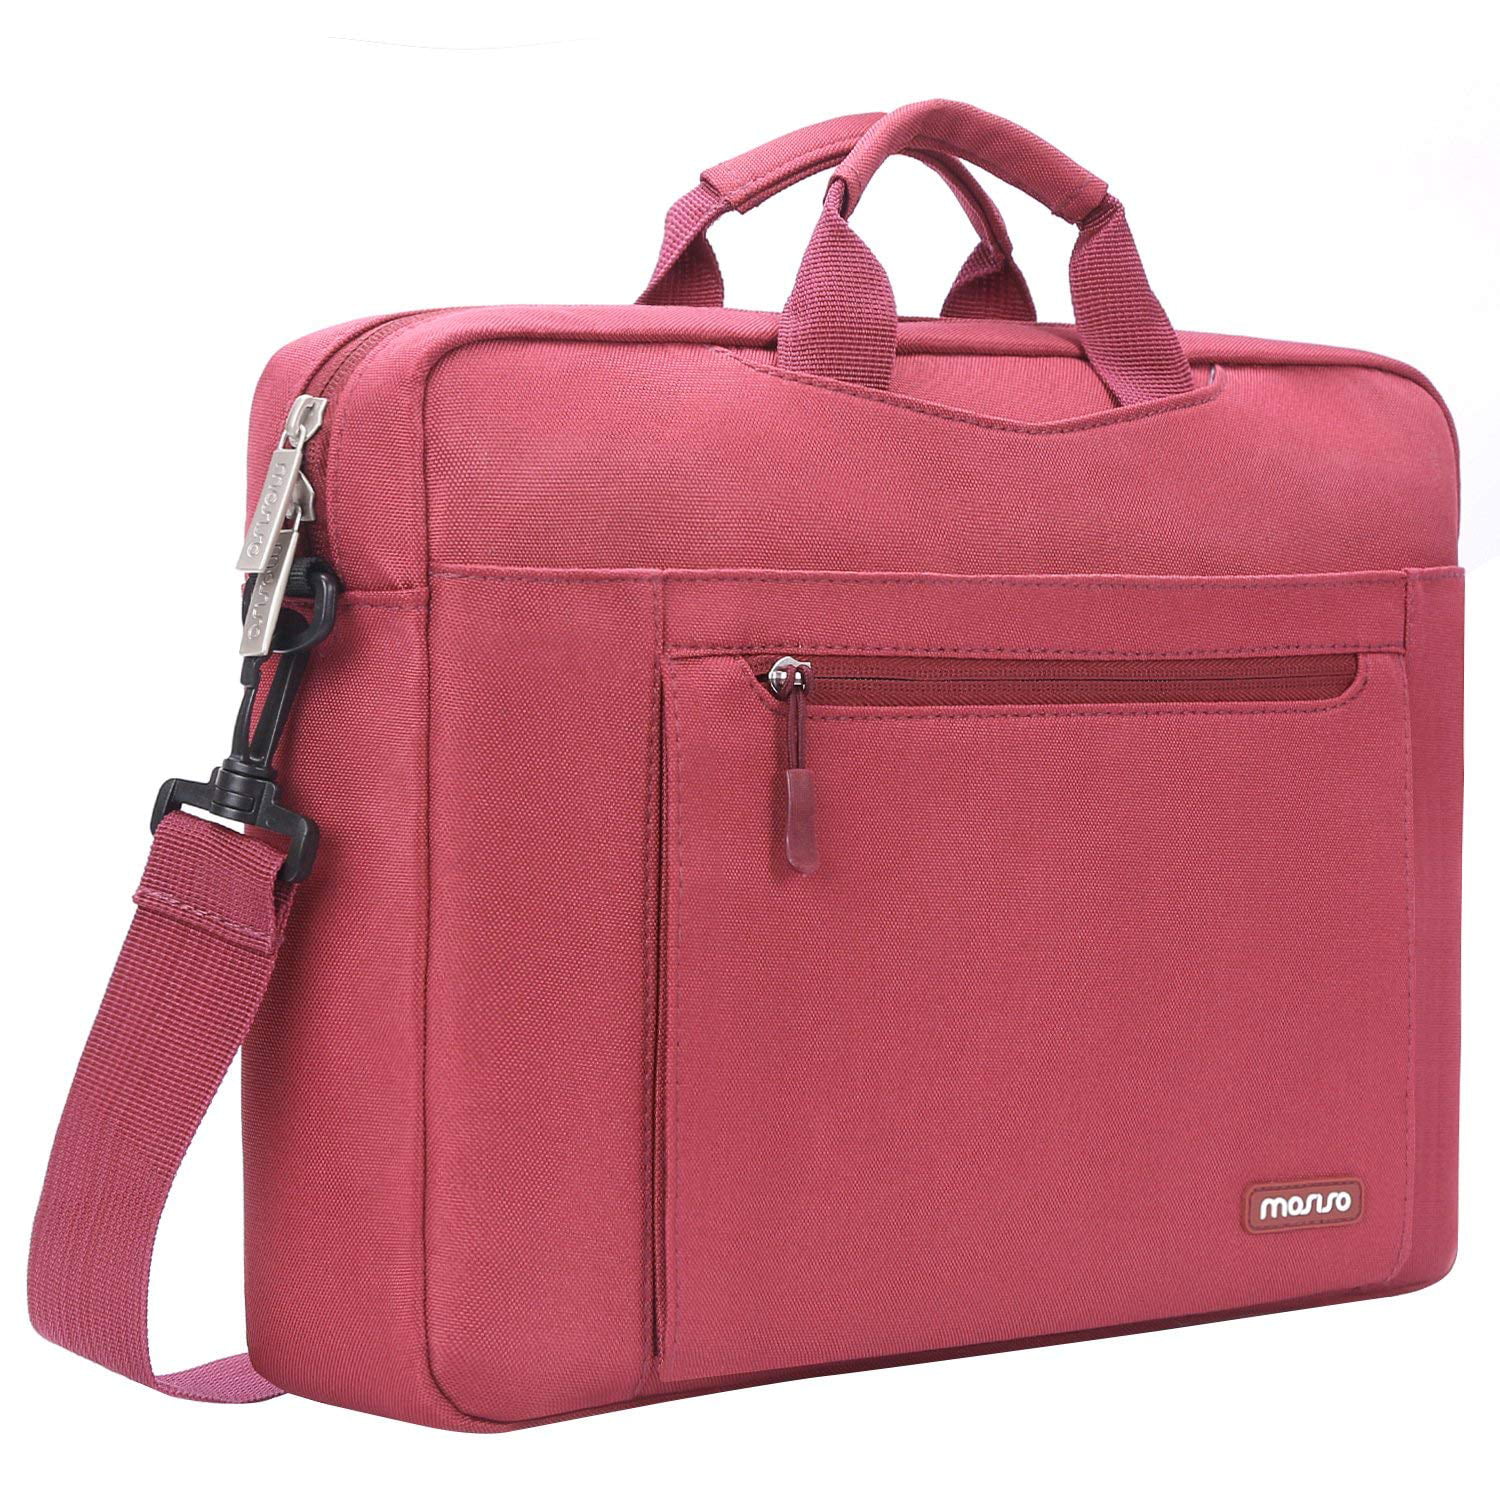 Mosiso Laptop Shoulder Bag For 13 133 Inch Macbook Pro Macbook Air Notebook With Interior 